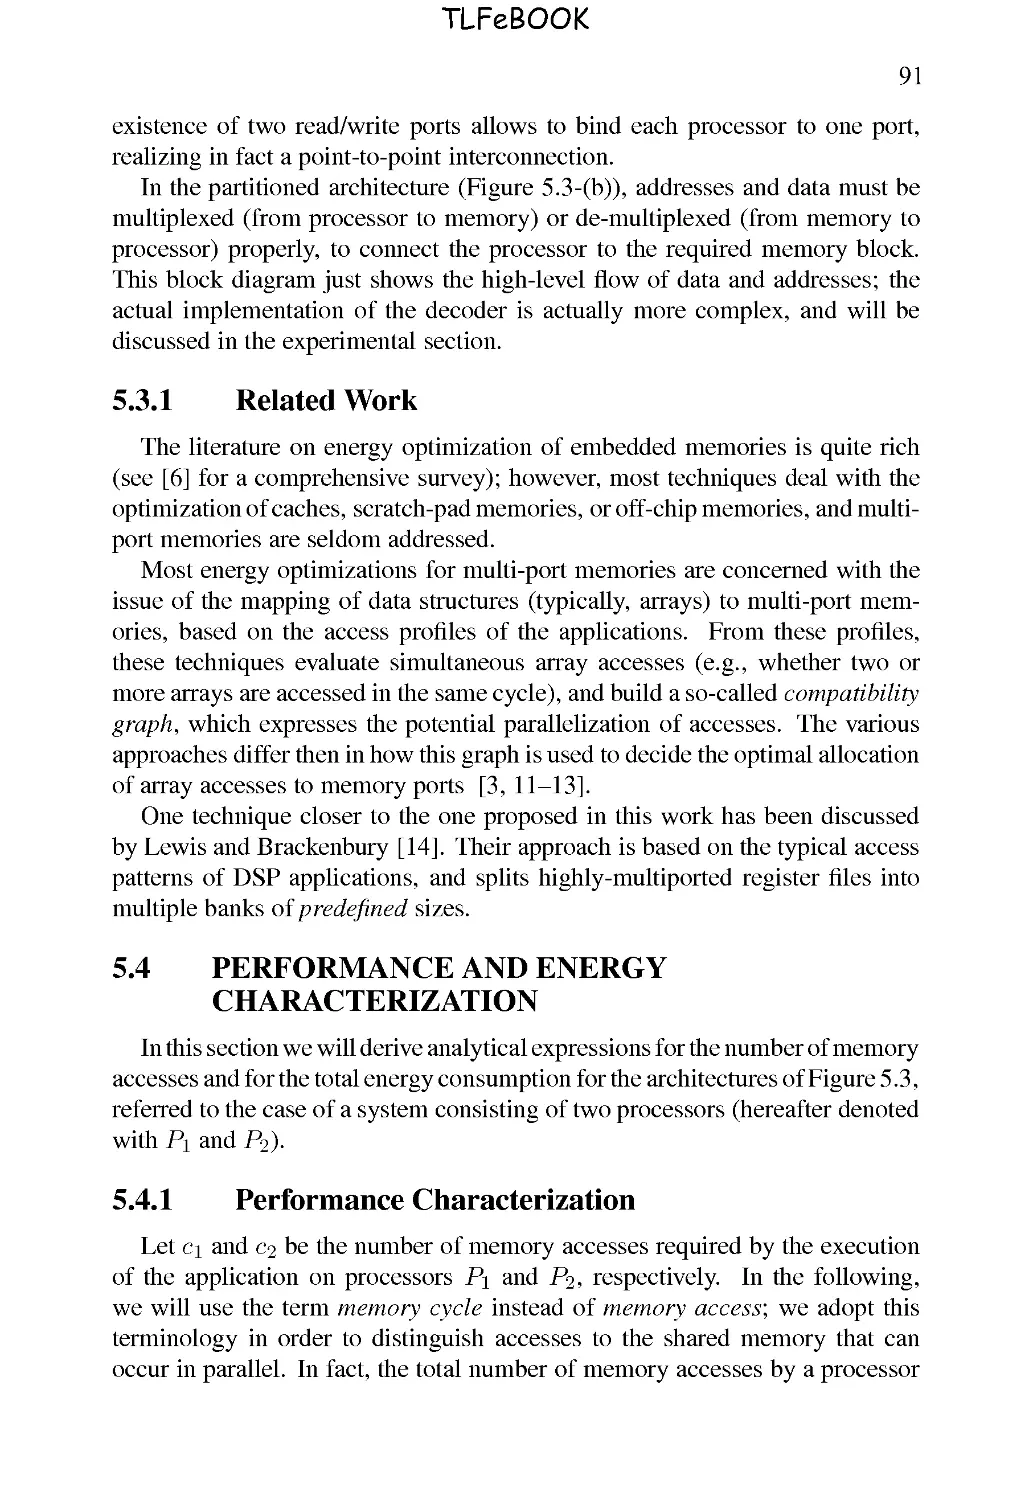 5.4 PERFORMANCE AND ENERGY CHARACTERIZATION